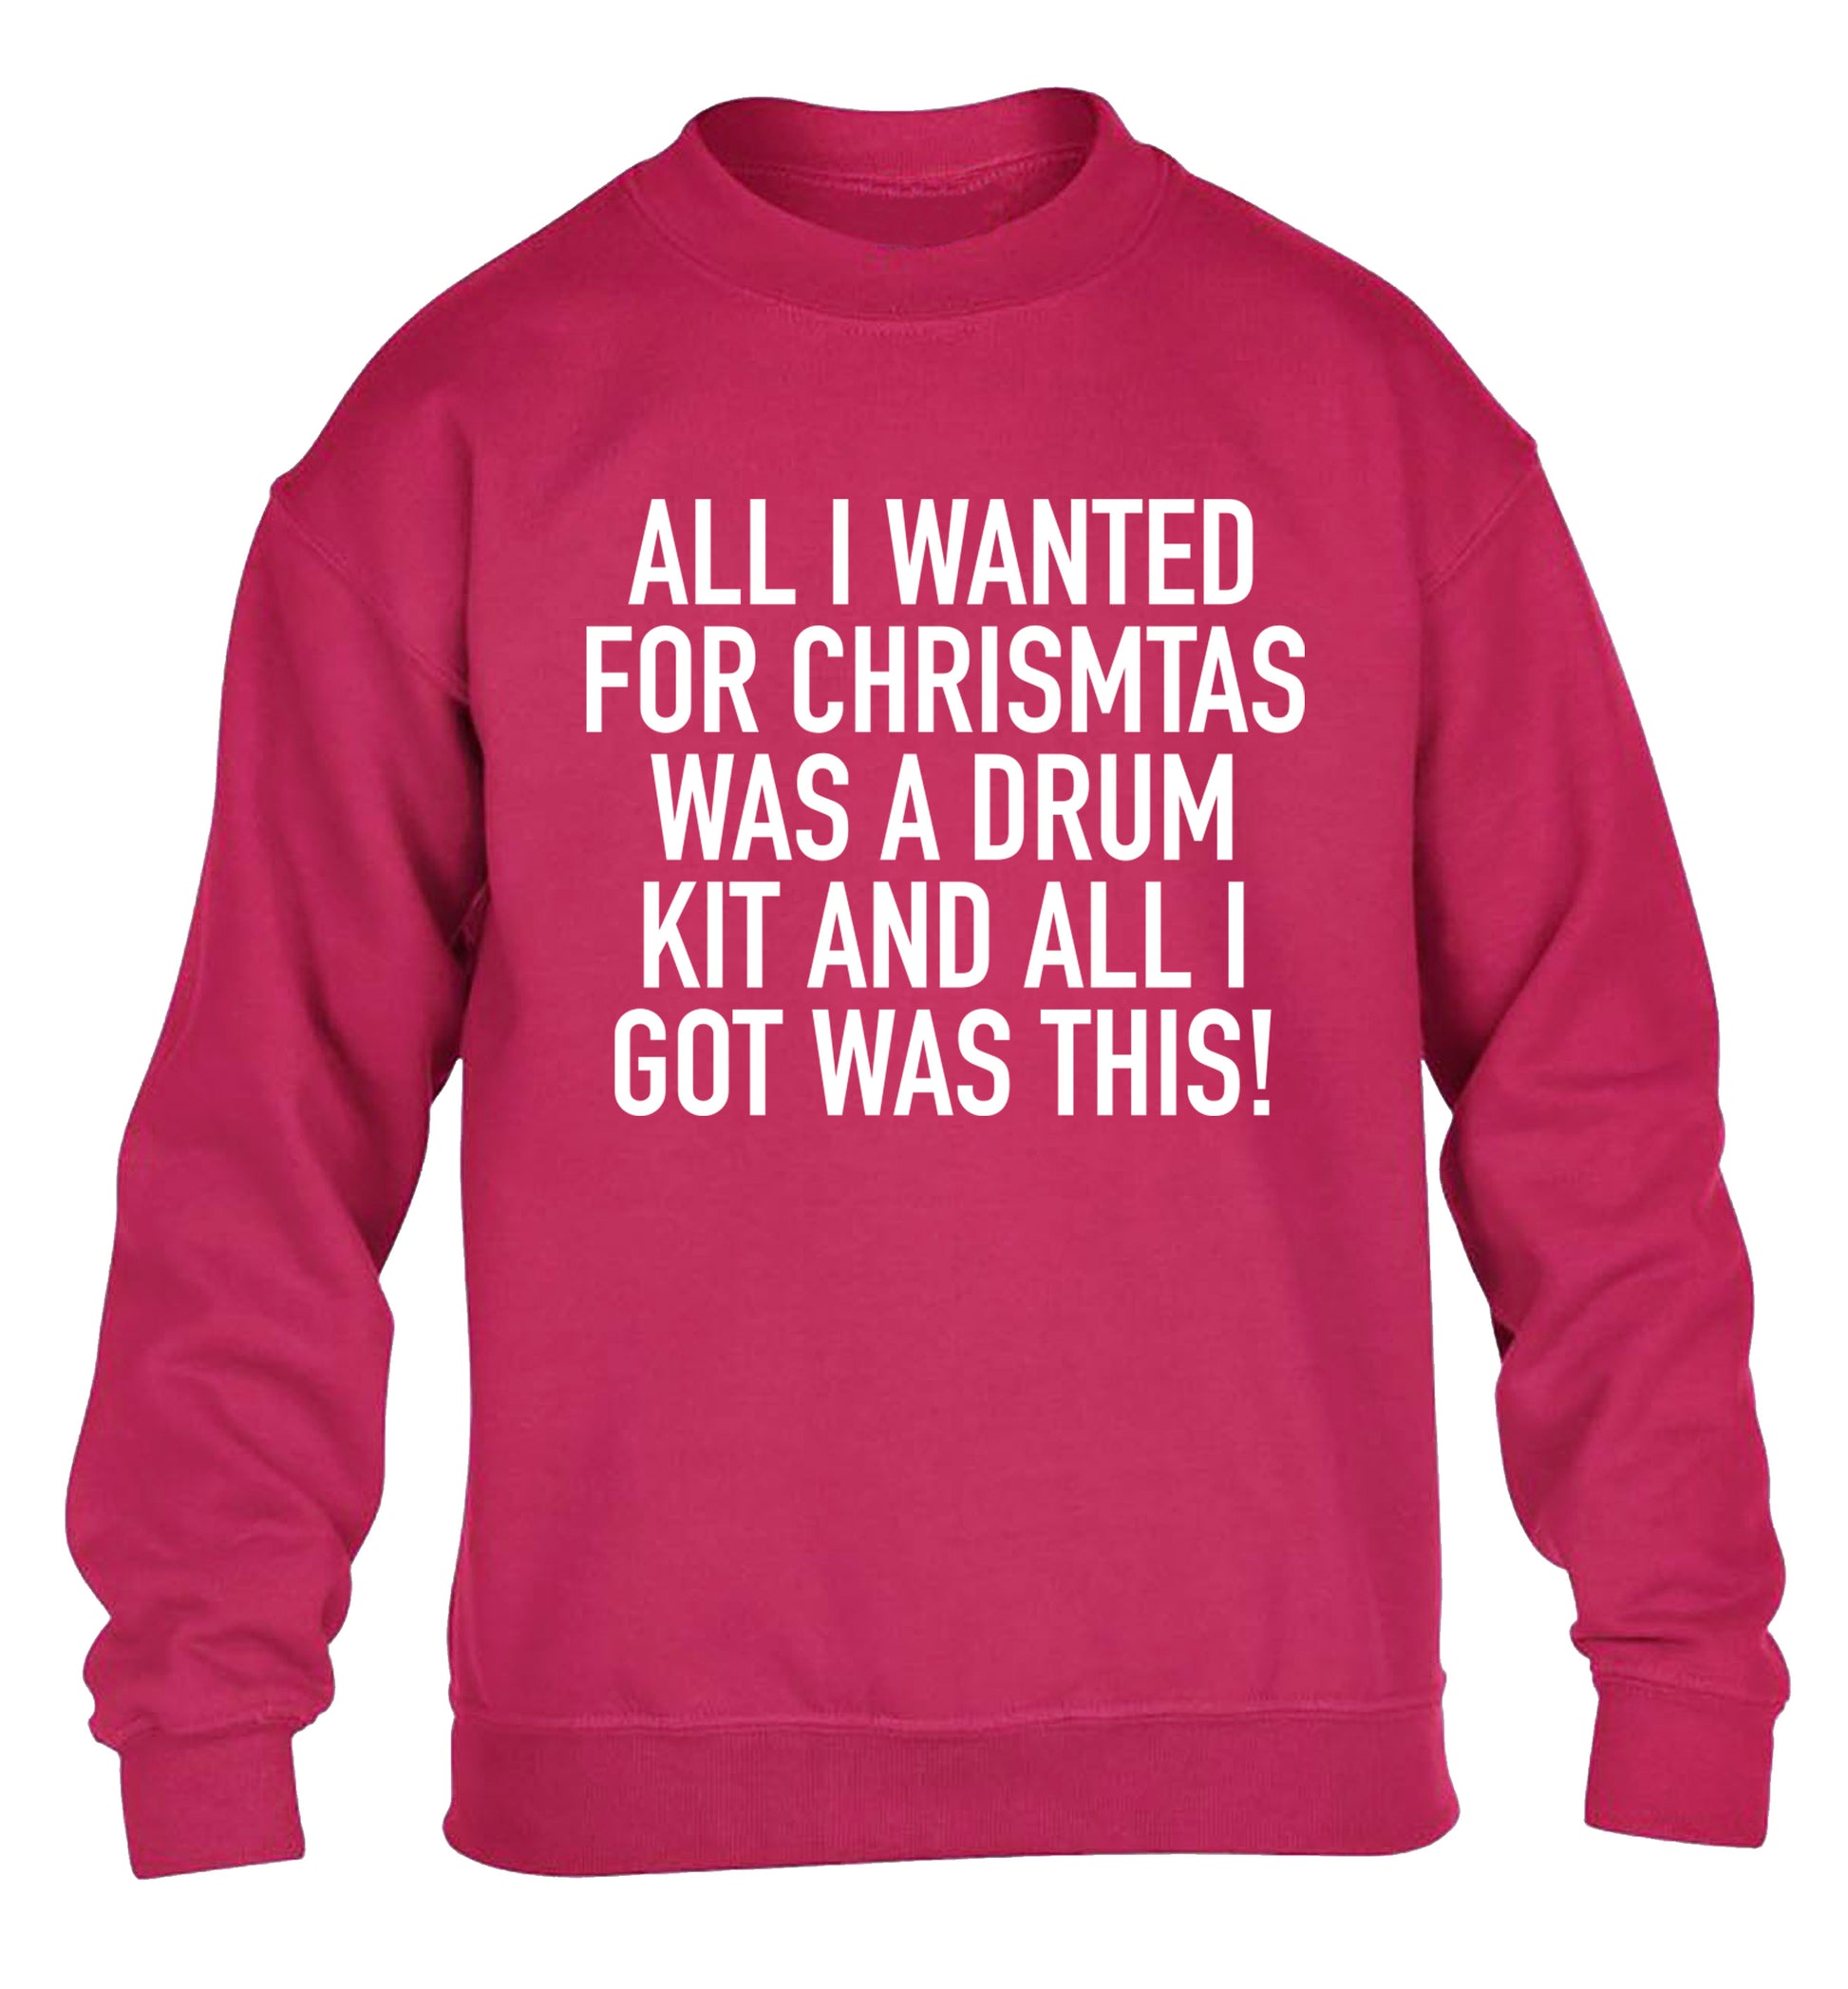 All I wanted for Christmas was a drum kit and all I got was this! children's pink sweater 12-14 Years